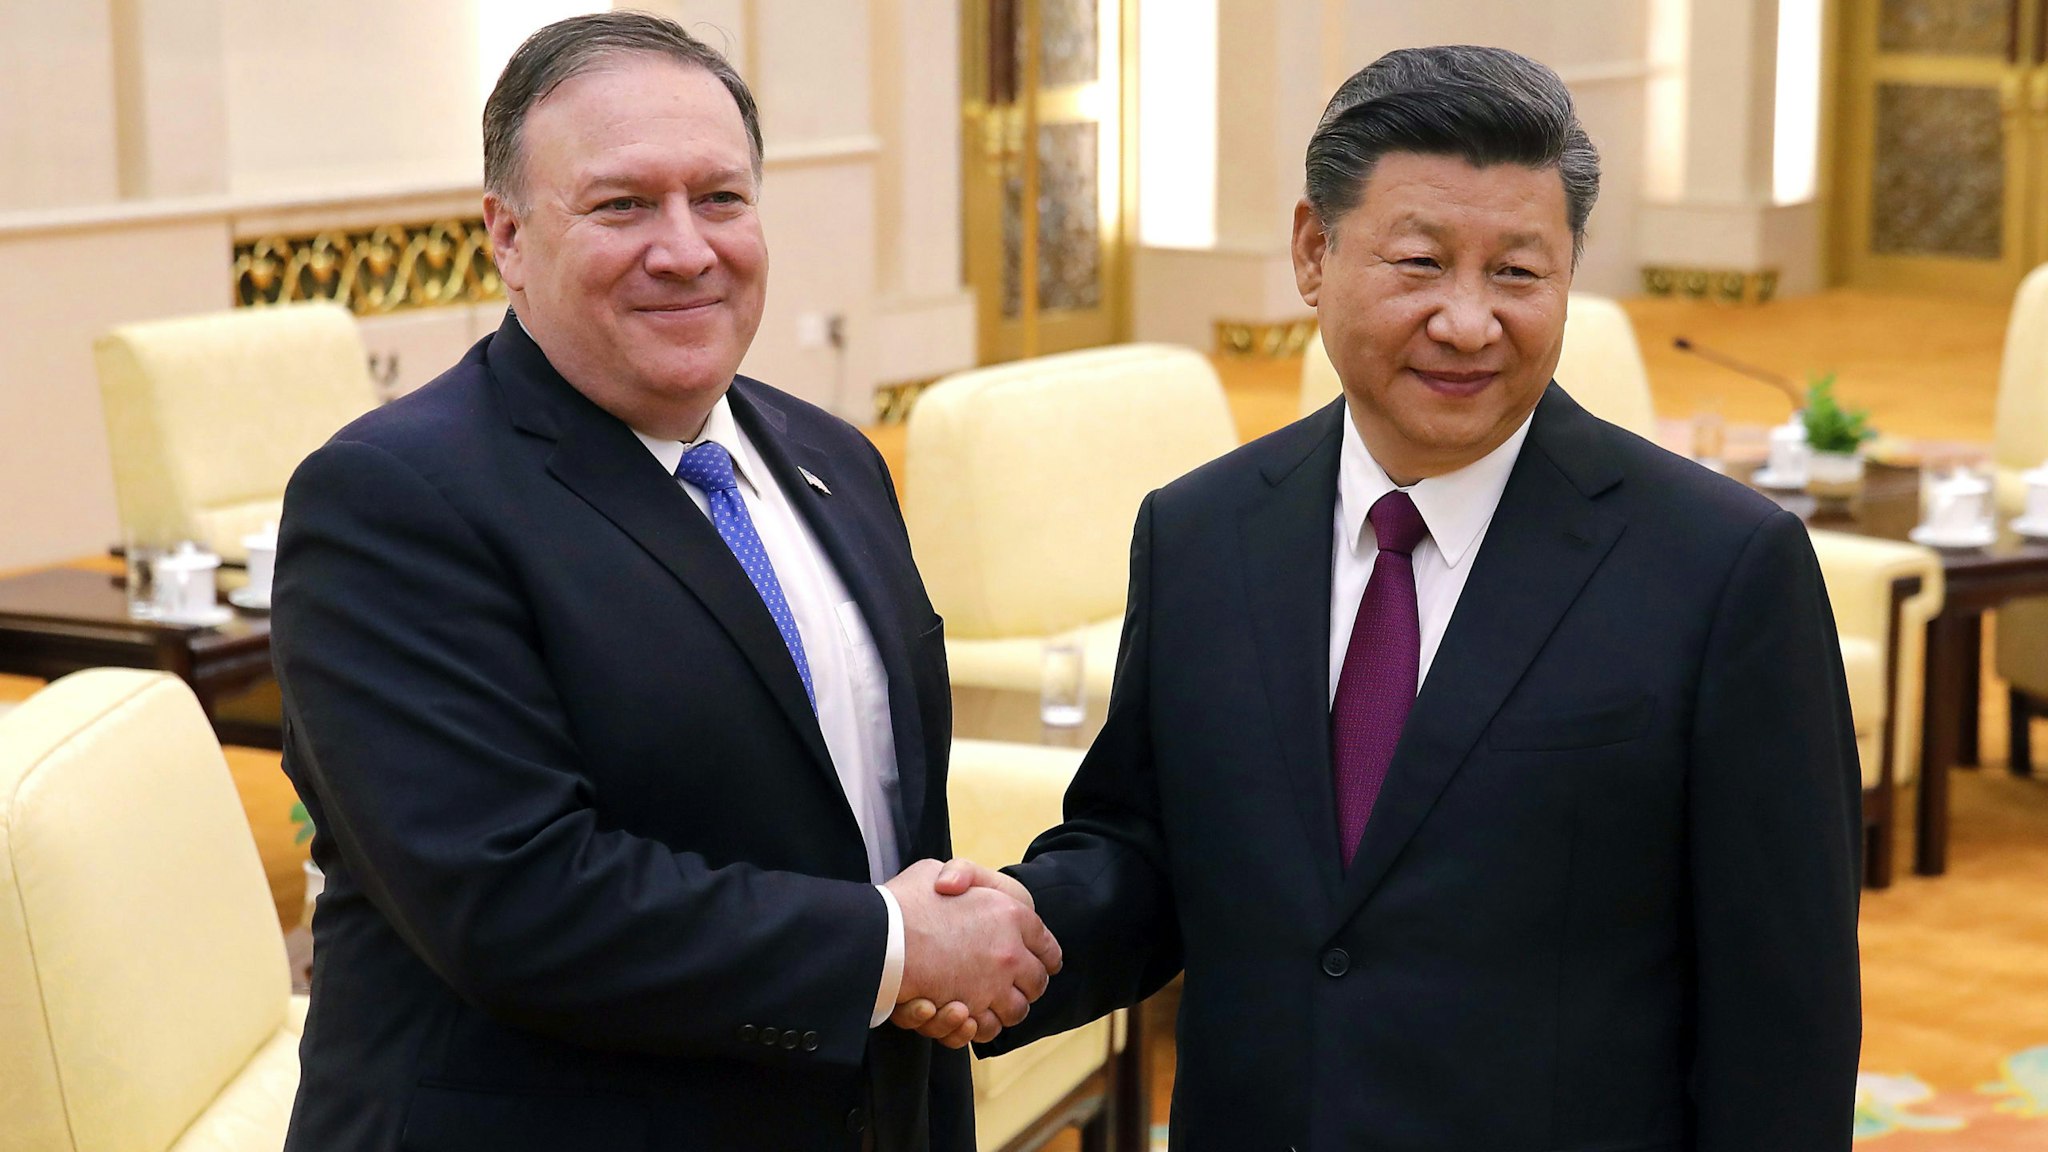 US Secretary of State Mike Pompeo (L) shakes hands with Chinese President Xi Jinping as they pose for photograph at the Great Hall of the People in Beijing on June 14, 2018.